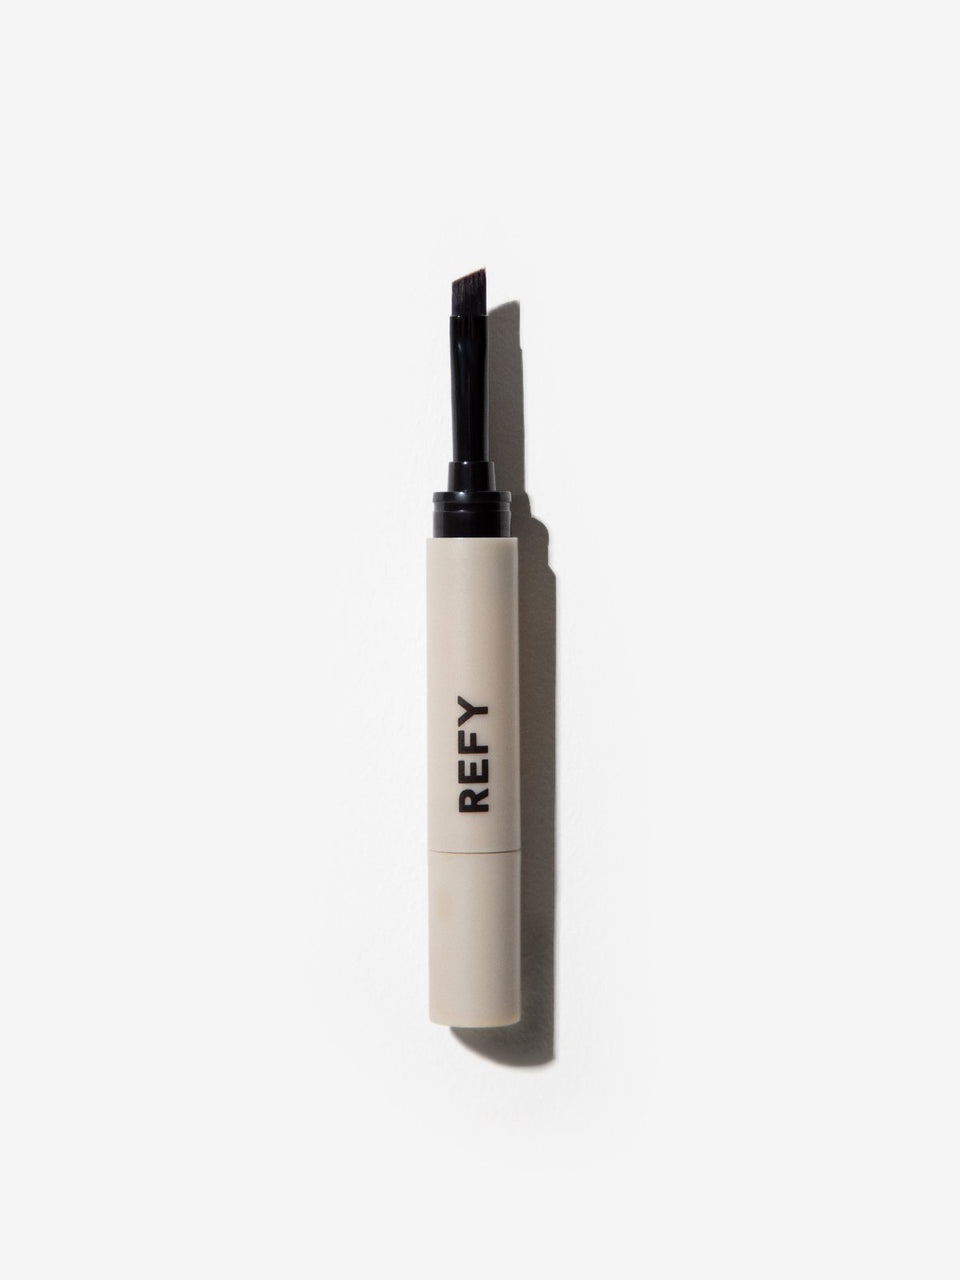 FRONT IMAGE OF REFY BROW POMADE APPLICATOR IN LIGHT